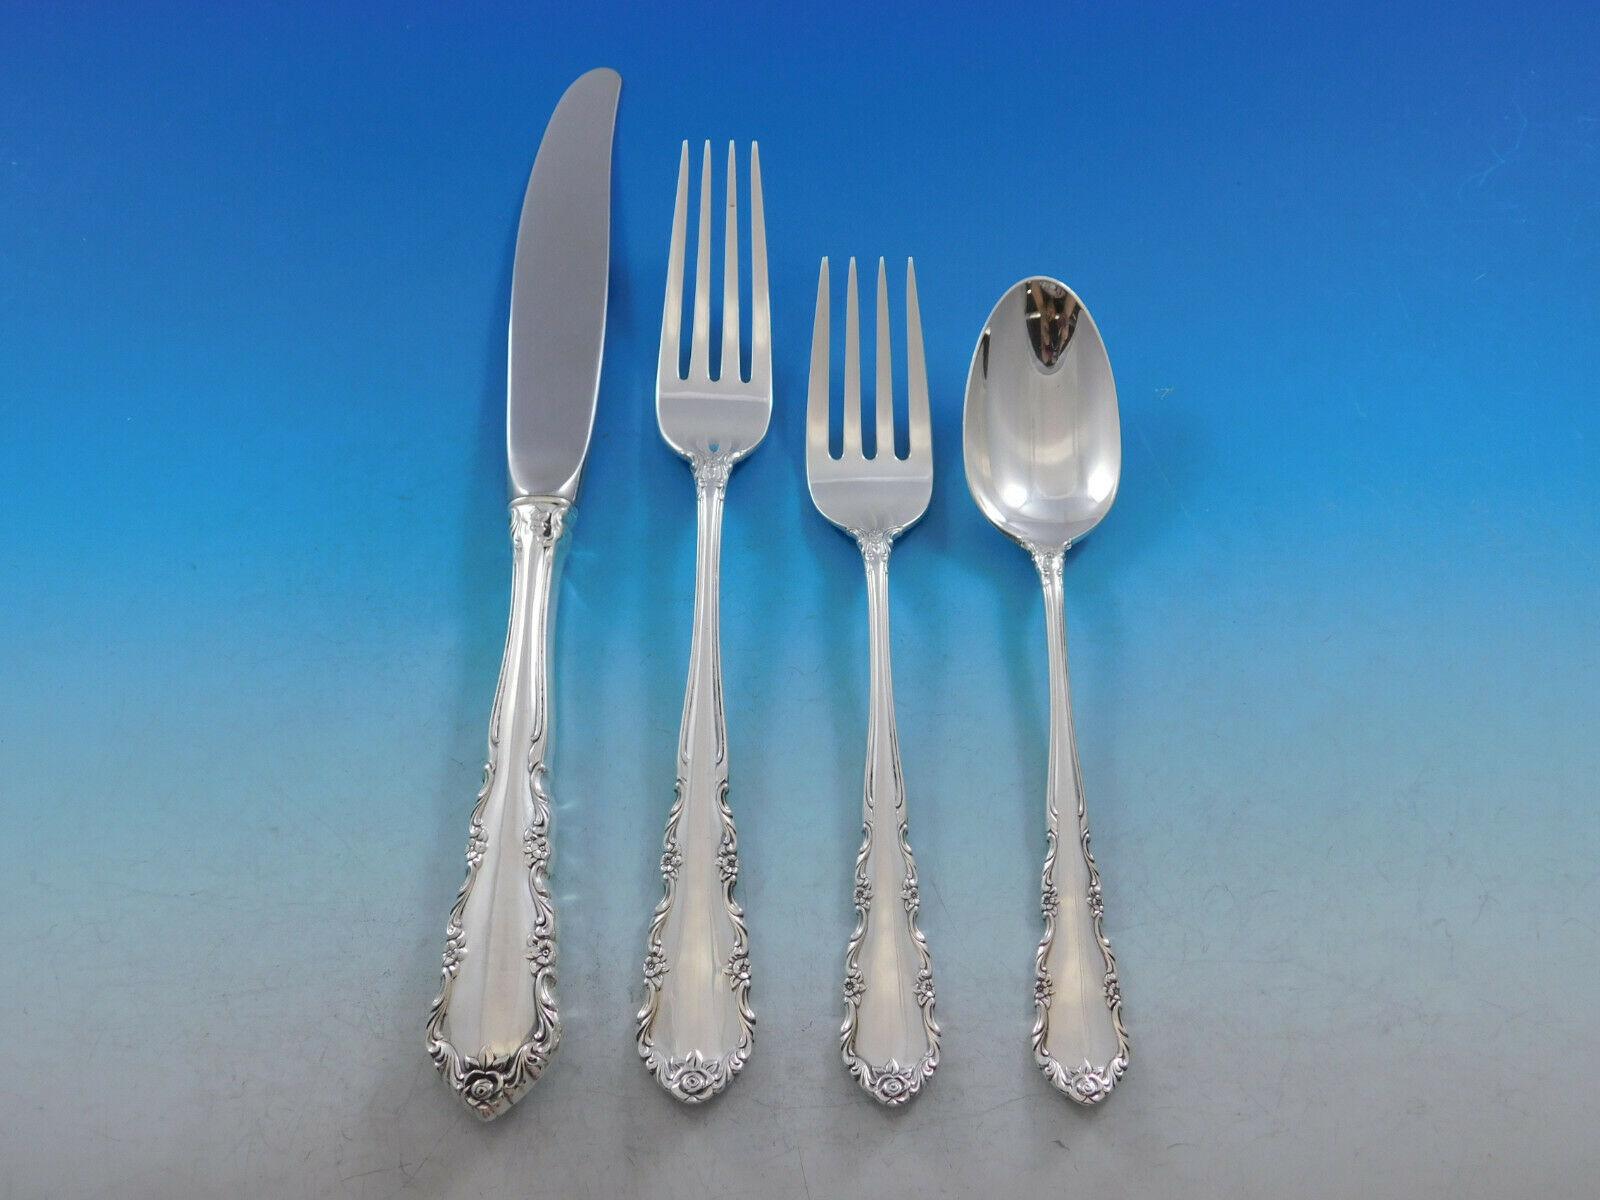 Shenandoah by Wallace sterling silver flatware set, 51 pieces. This set includes:

8 knives, 9